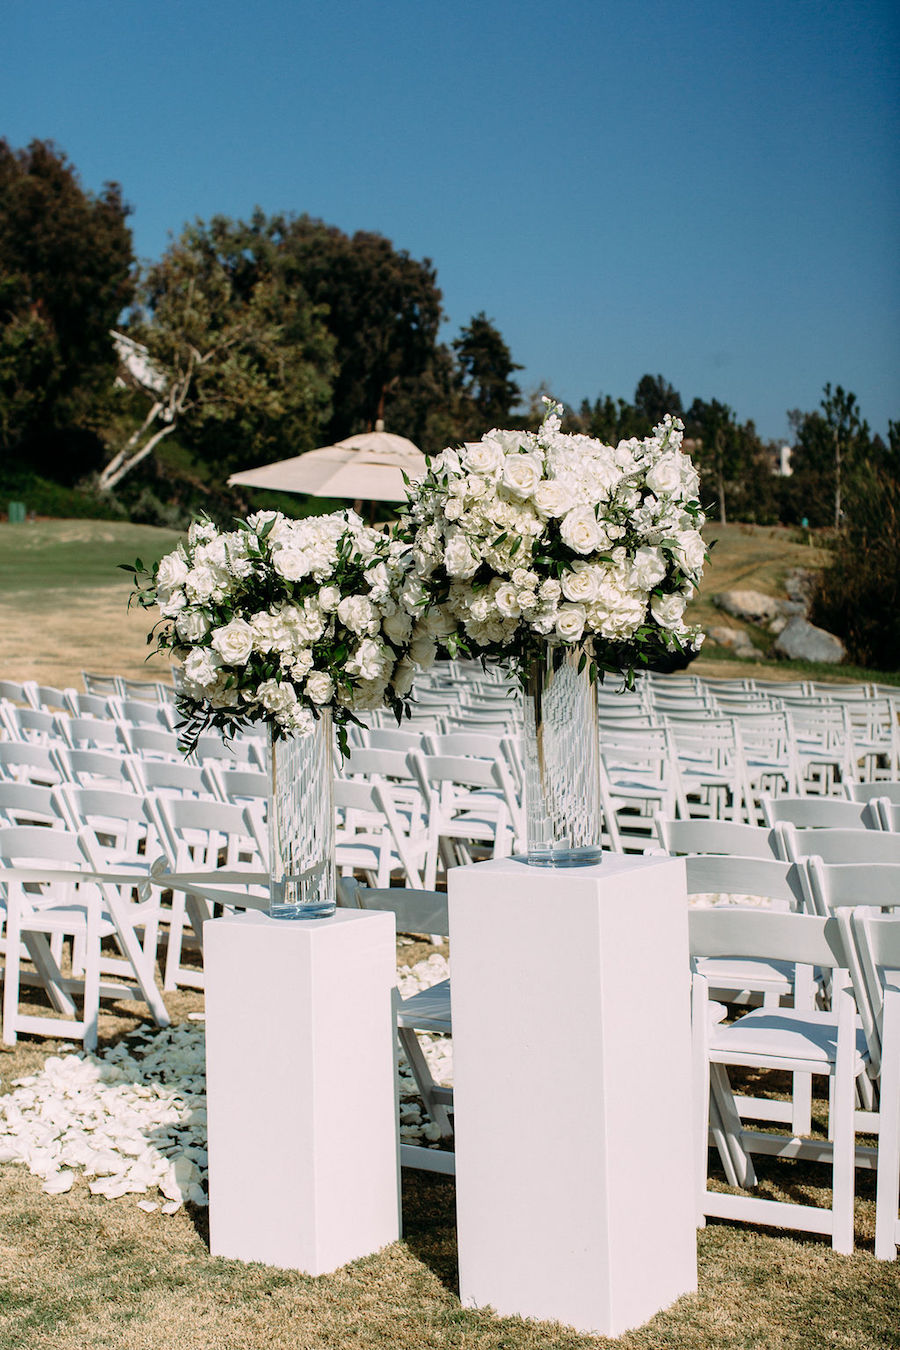 Big Canyon Country Club, Kelsey Events, Flowers By Cina, Ashley Paige Photography, Luxury Lifestyle Studios LLC, Signature Party Rentals, Amber Event Productions, Visions Entertainment, Ian Whitelaw, Dolled Up OC
